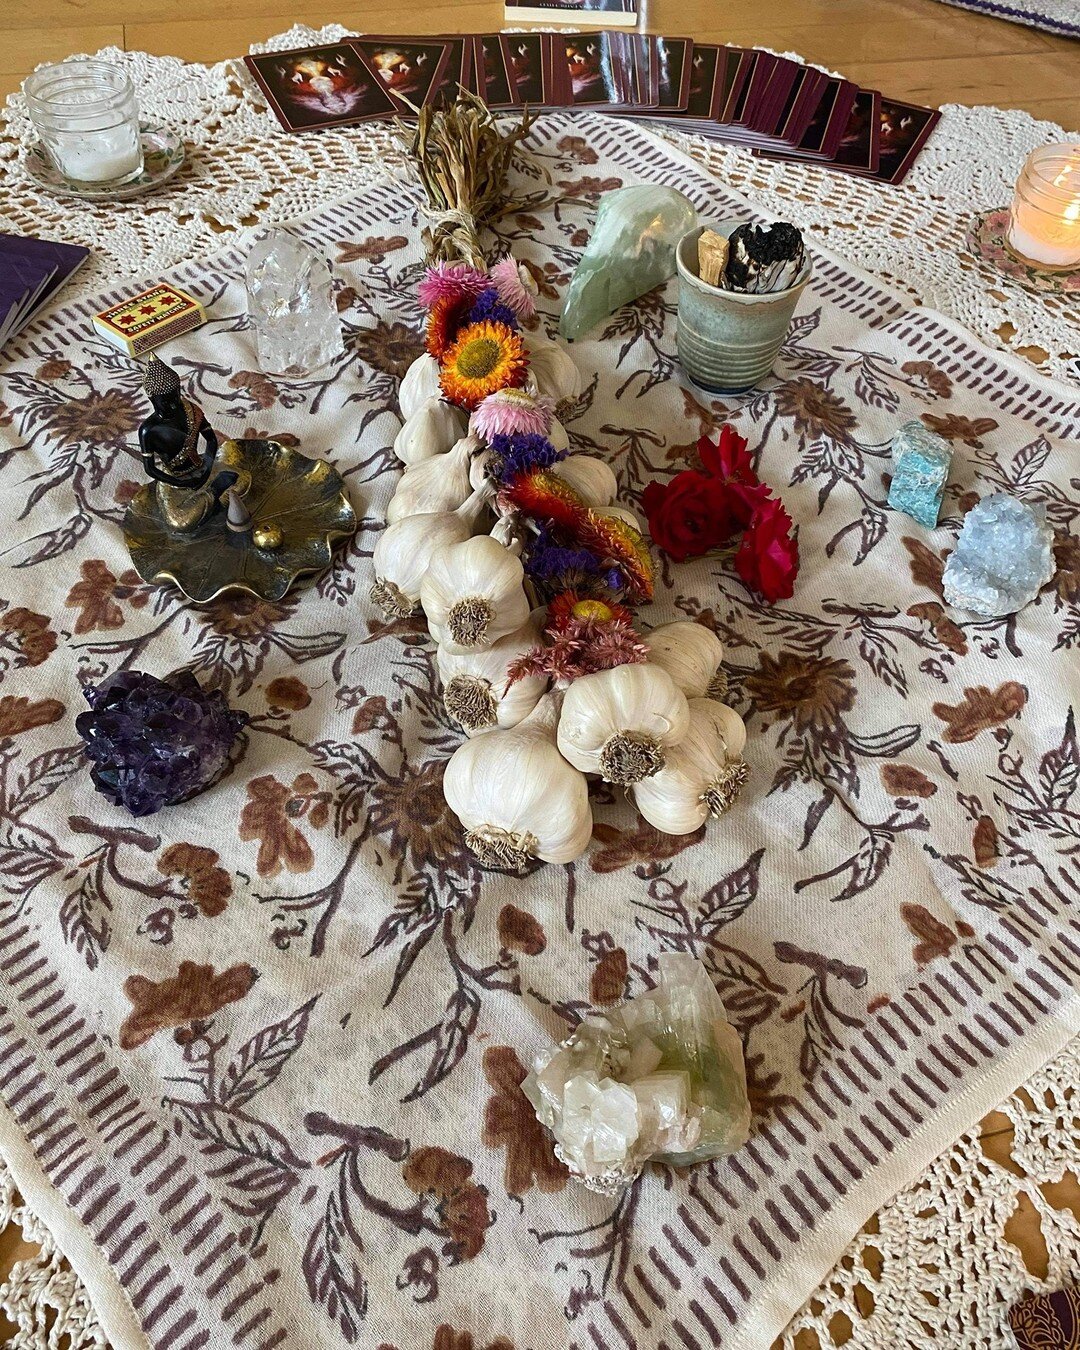 Sharing Circle at Open Sky Studio (8 Main Street Bristol) on Sunday from 3:30pm to 5:00pm. Continued theme on Fearlessness. Personal Strength and Sovereignity. #beanofthefields #sharingcircle #stowellfarm #sovereignity